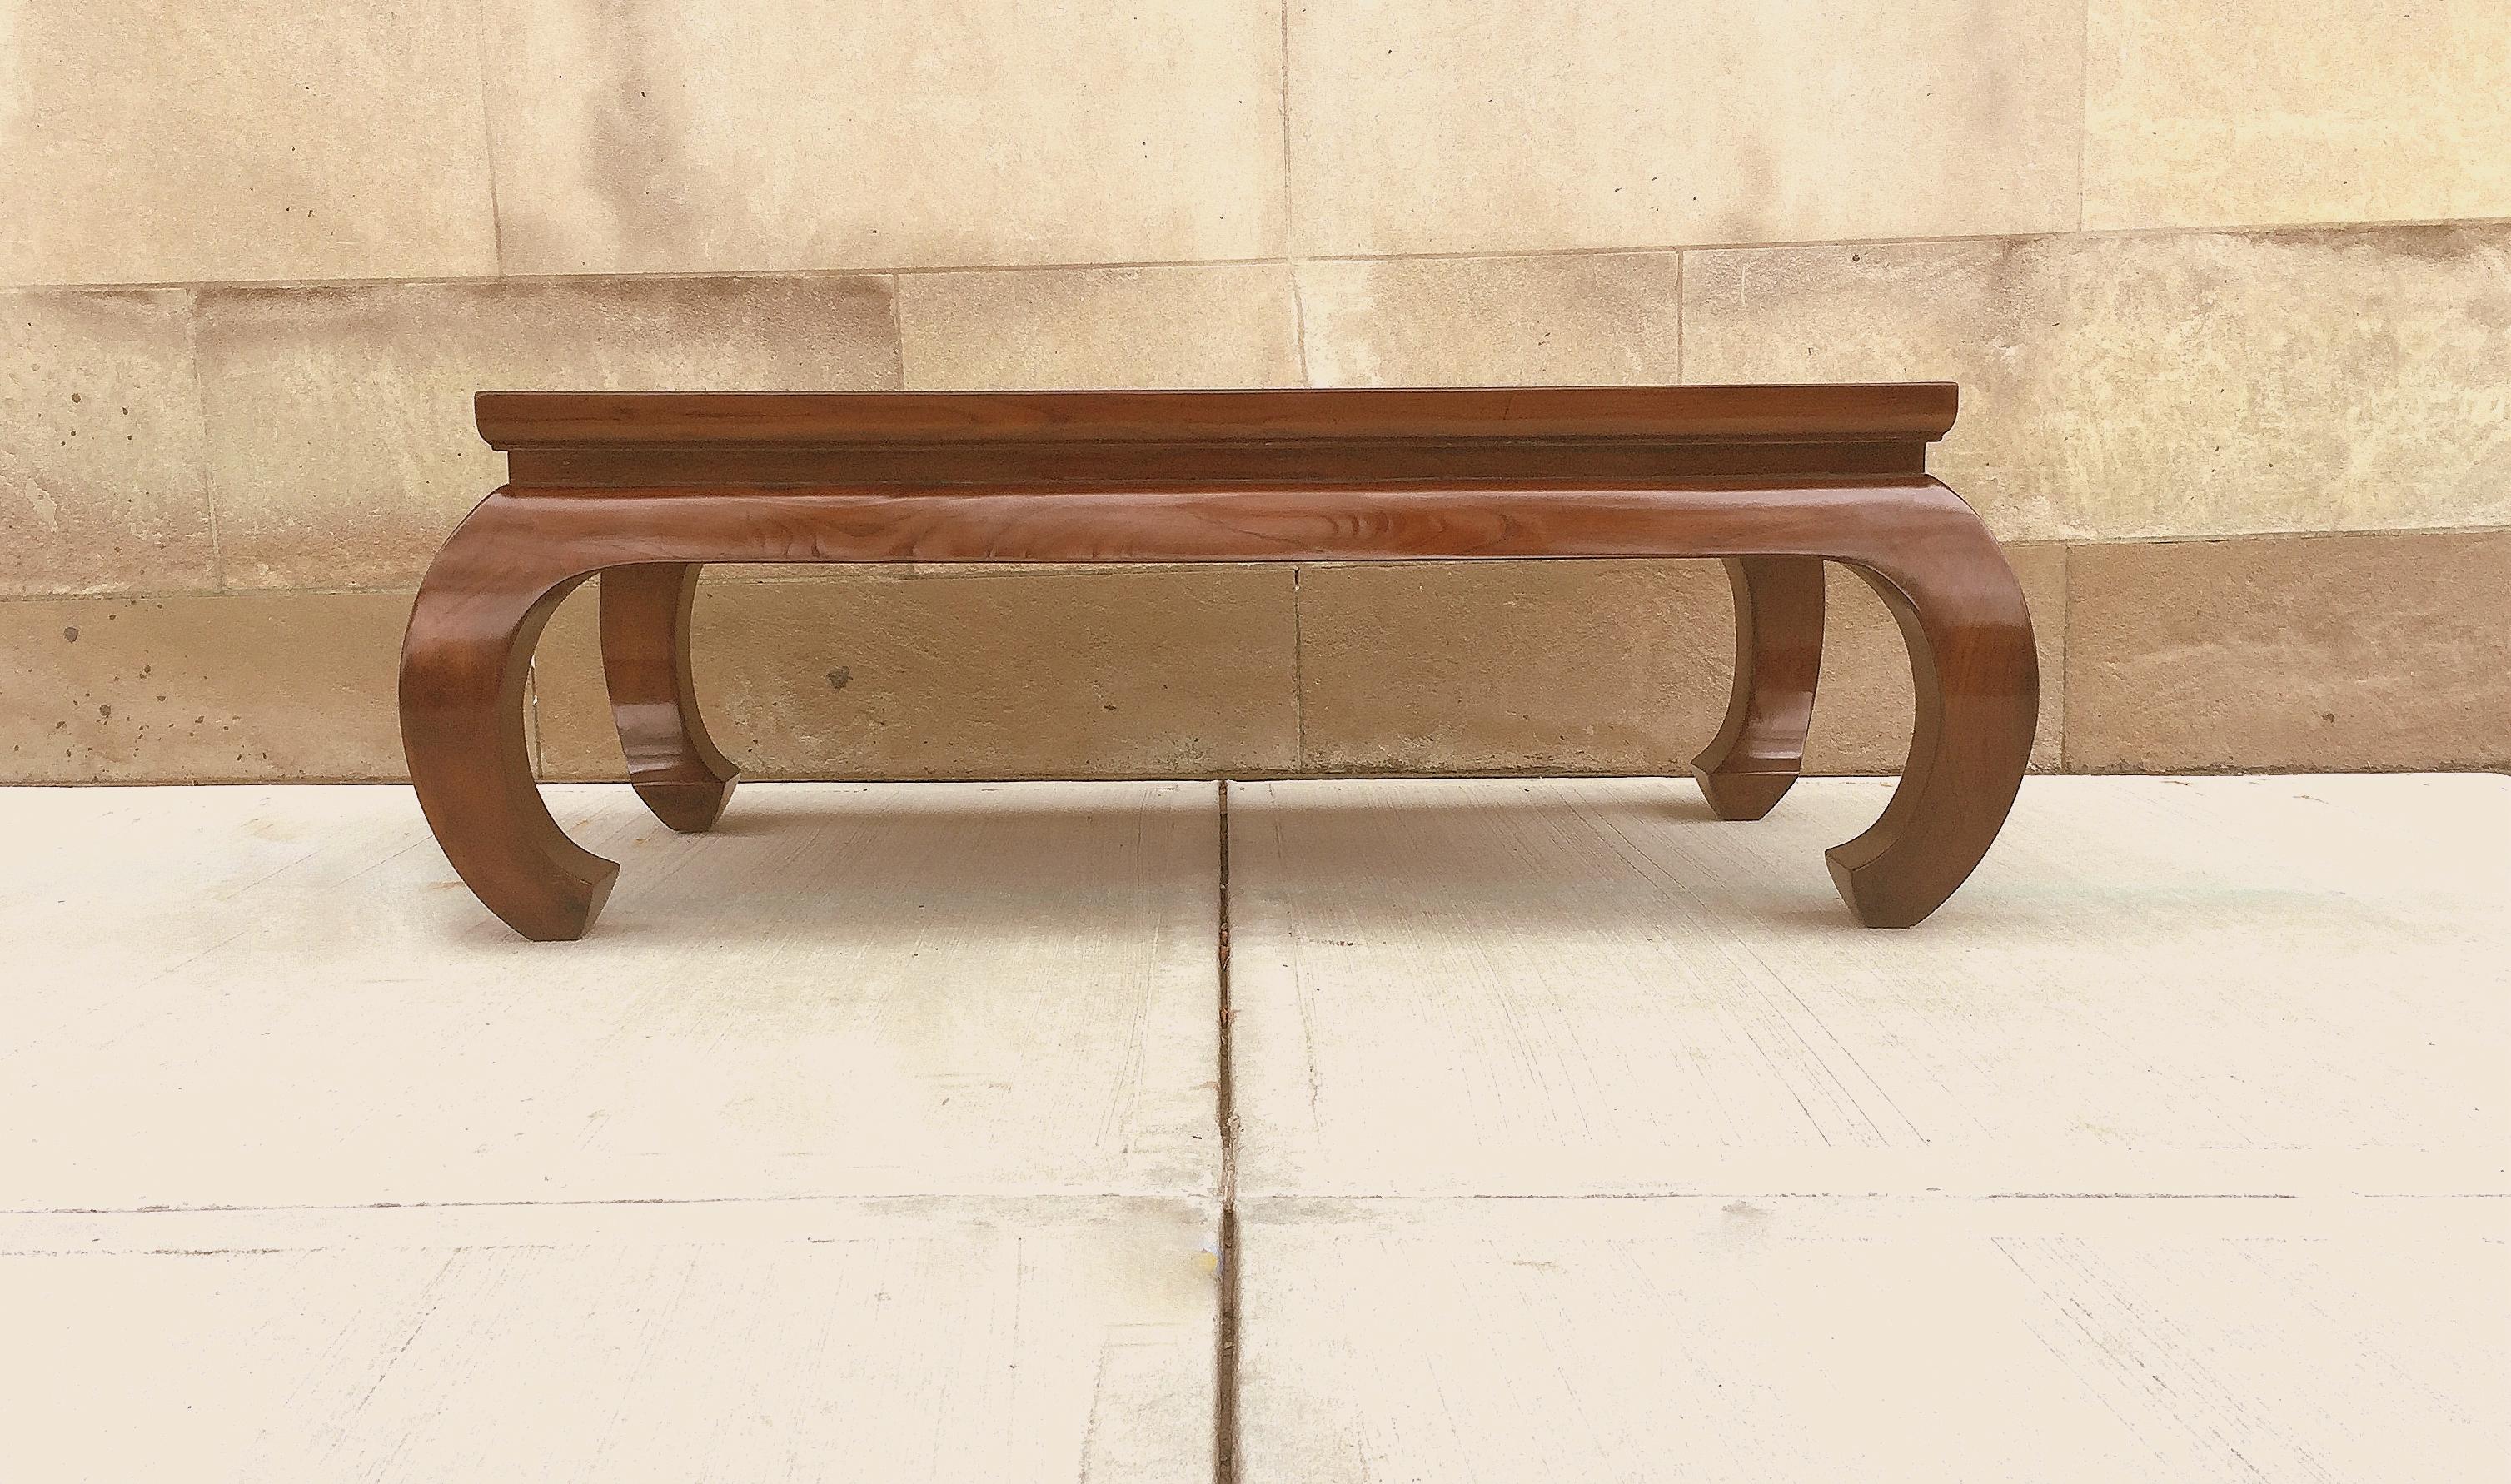 Fine Jumu low table / coffee table. Table top is 46